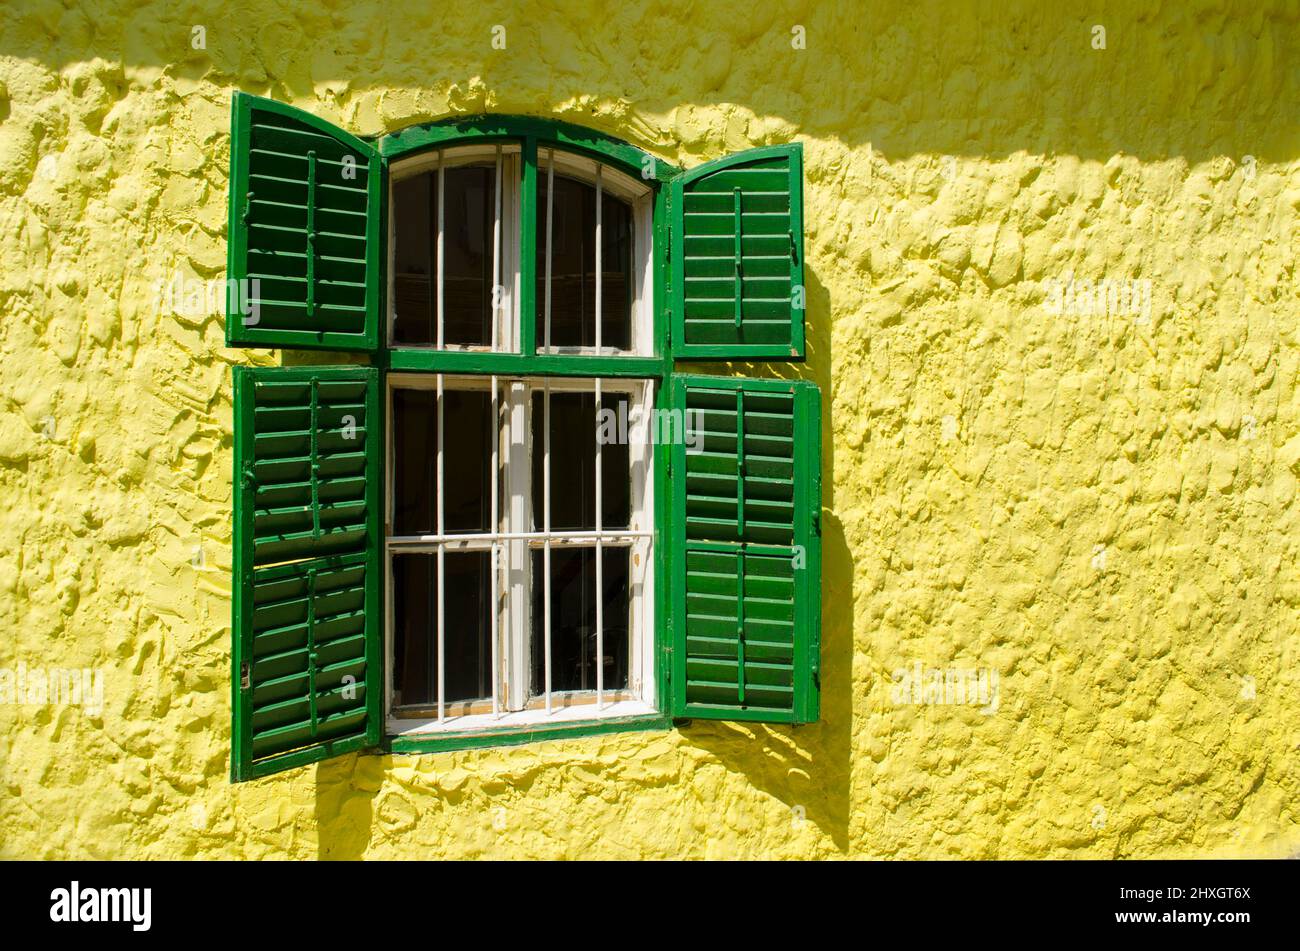 An old wooden window with metal bars on a yellow wall. Stock Photo